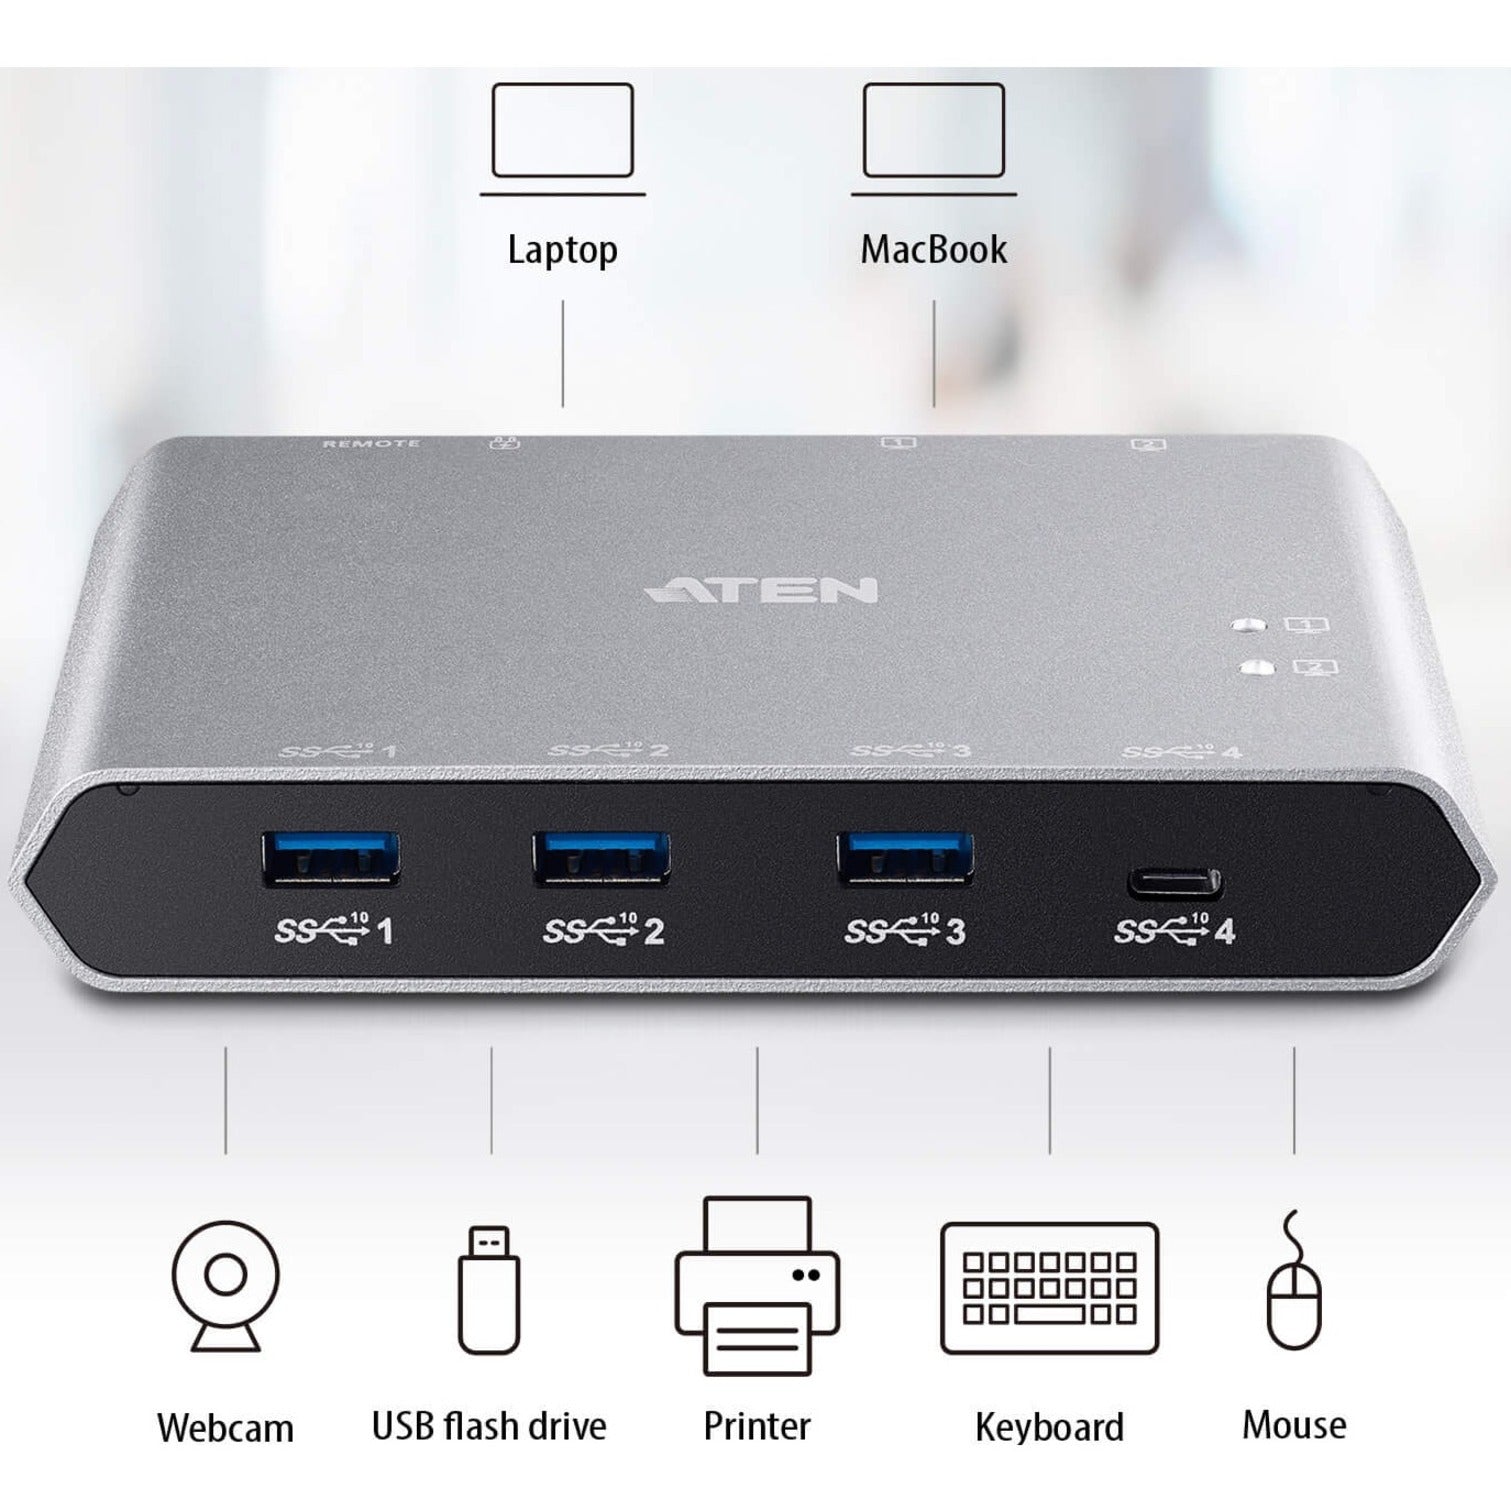 ATEN US3342 2-Port USB-C Gen 2 Sharing Switch with Power Pass-through, USB Hub for Mac and PC